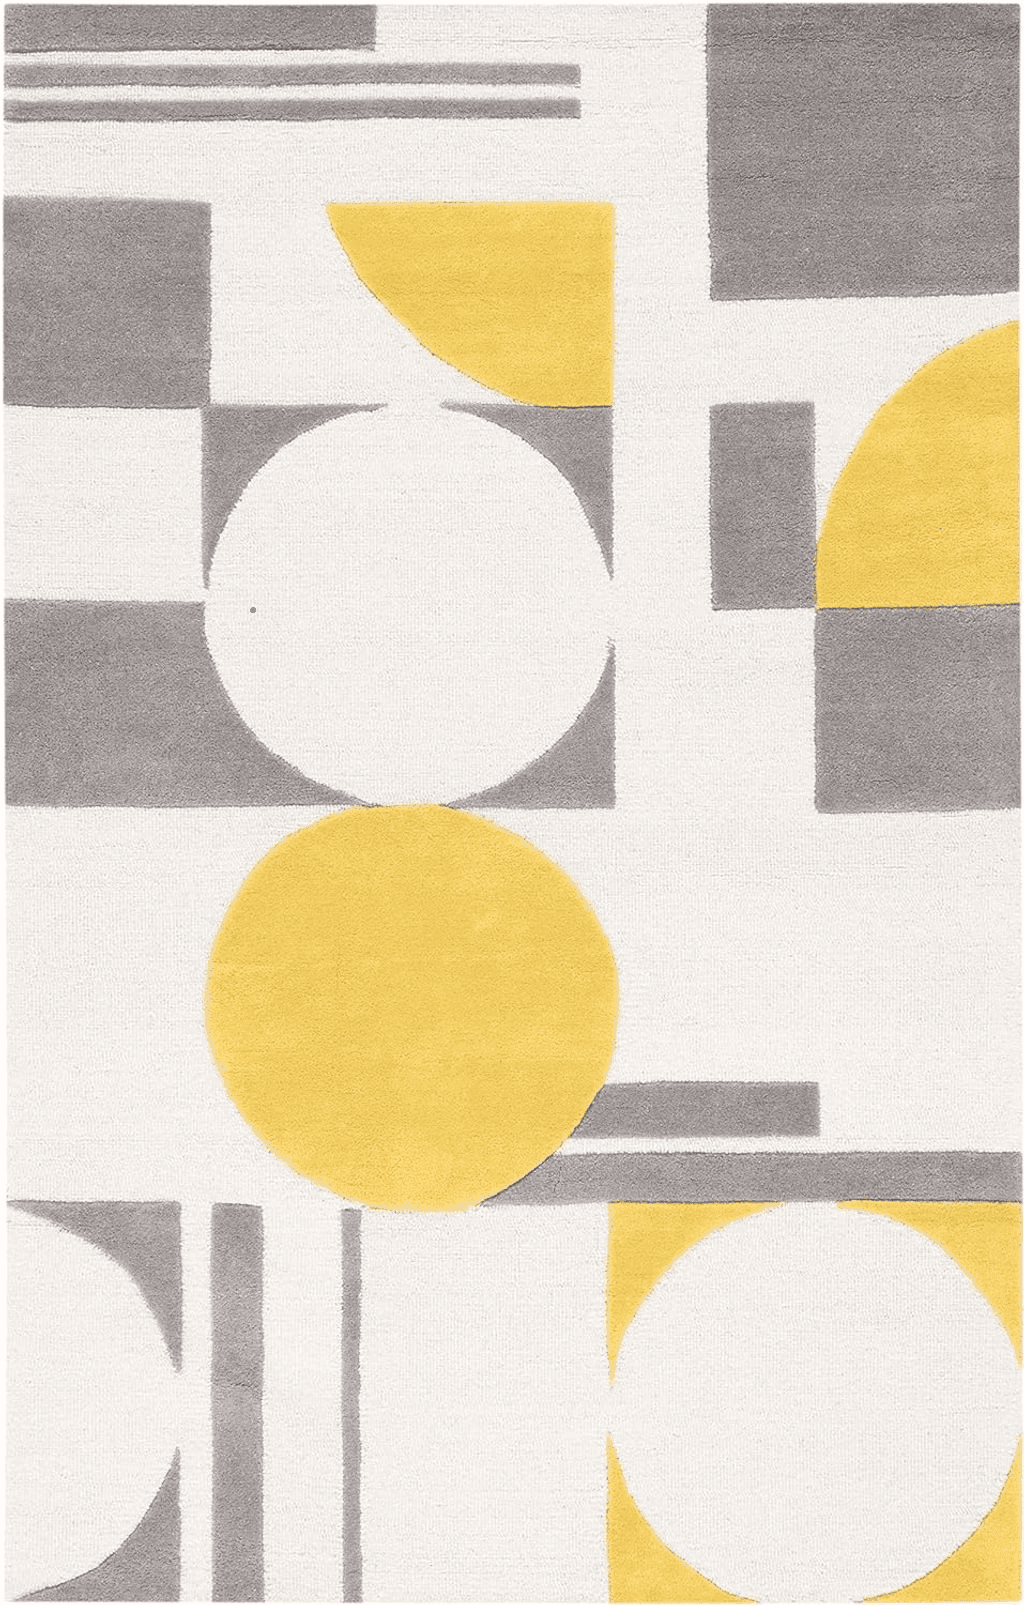 SAFAVIEH Rodeo Drive Collection Area Rug - 8' x 10', Grey & Gold, Handmade Mid-Century Modern Abstract Wool, Ideal for High Traffic Areas in Living Room, Bedroom (RD856D)